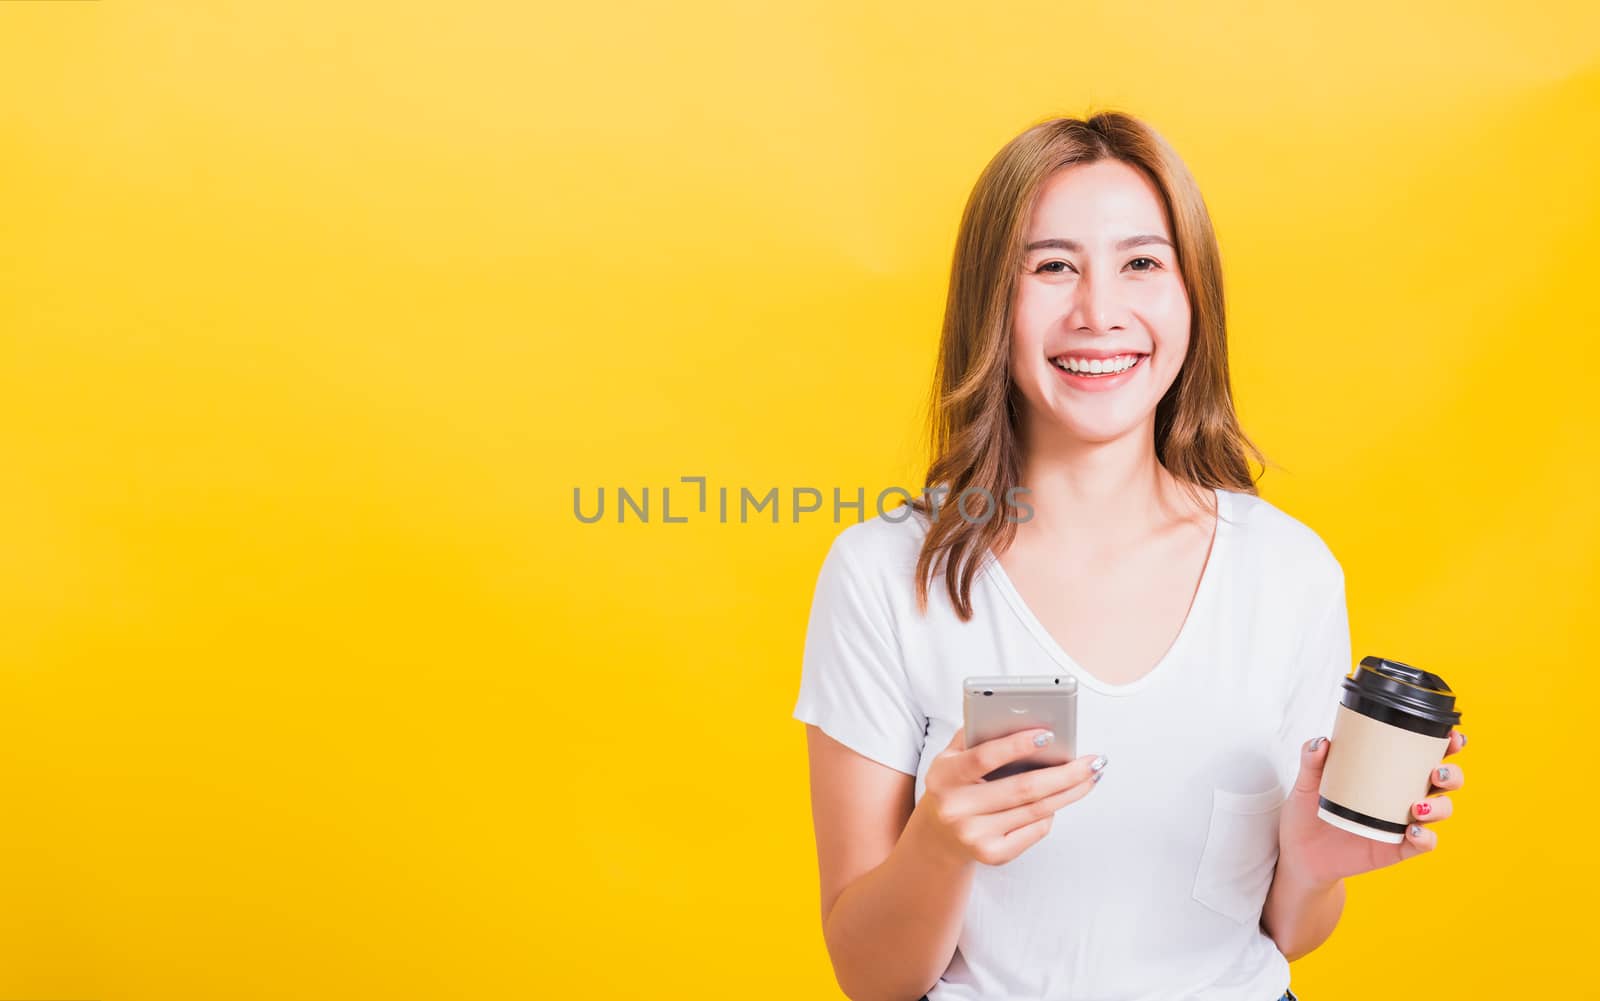 Portrait Asian Thai beautiful happy young woman standing smile, using mobile phone her holding coffee paper cup, looking to camera, studio shot isolated on yellow background, with copy space